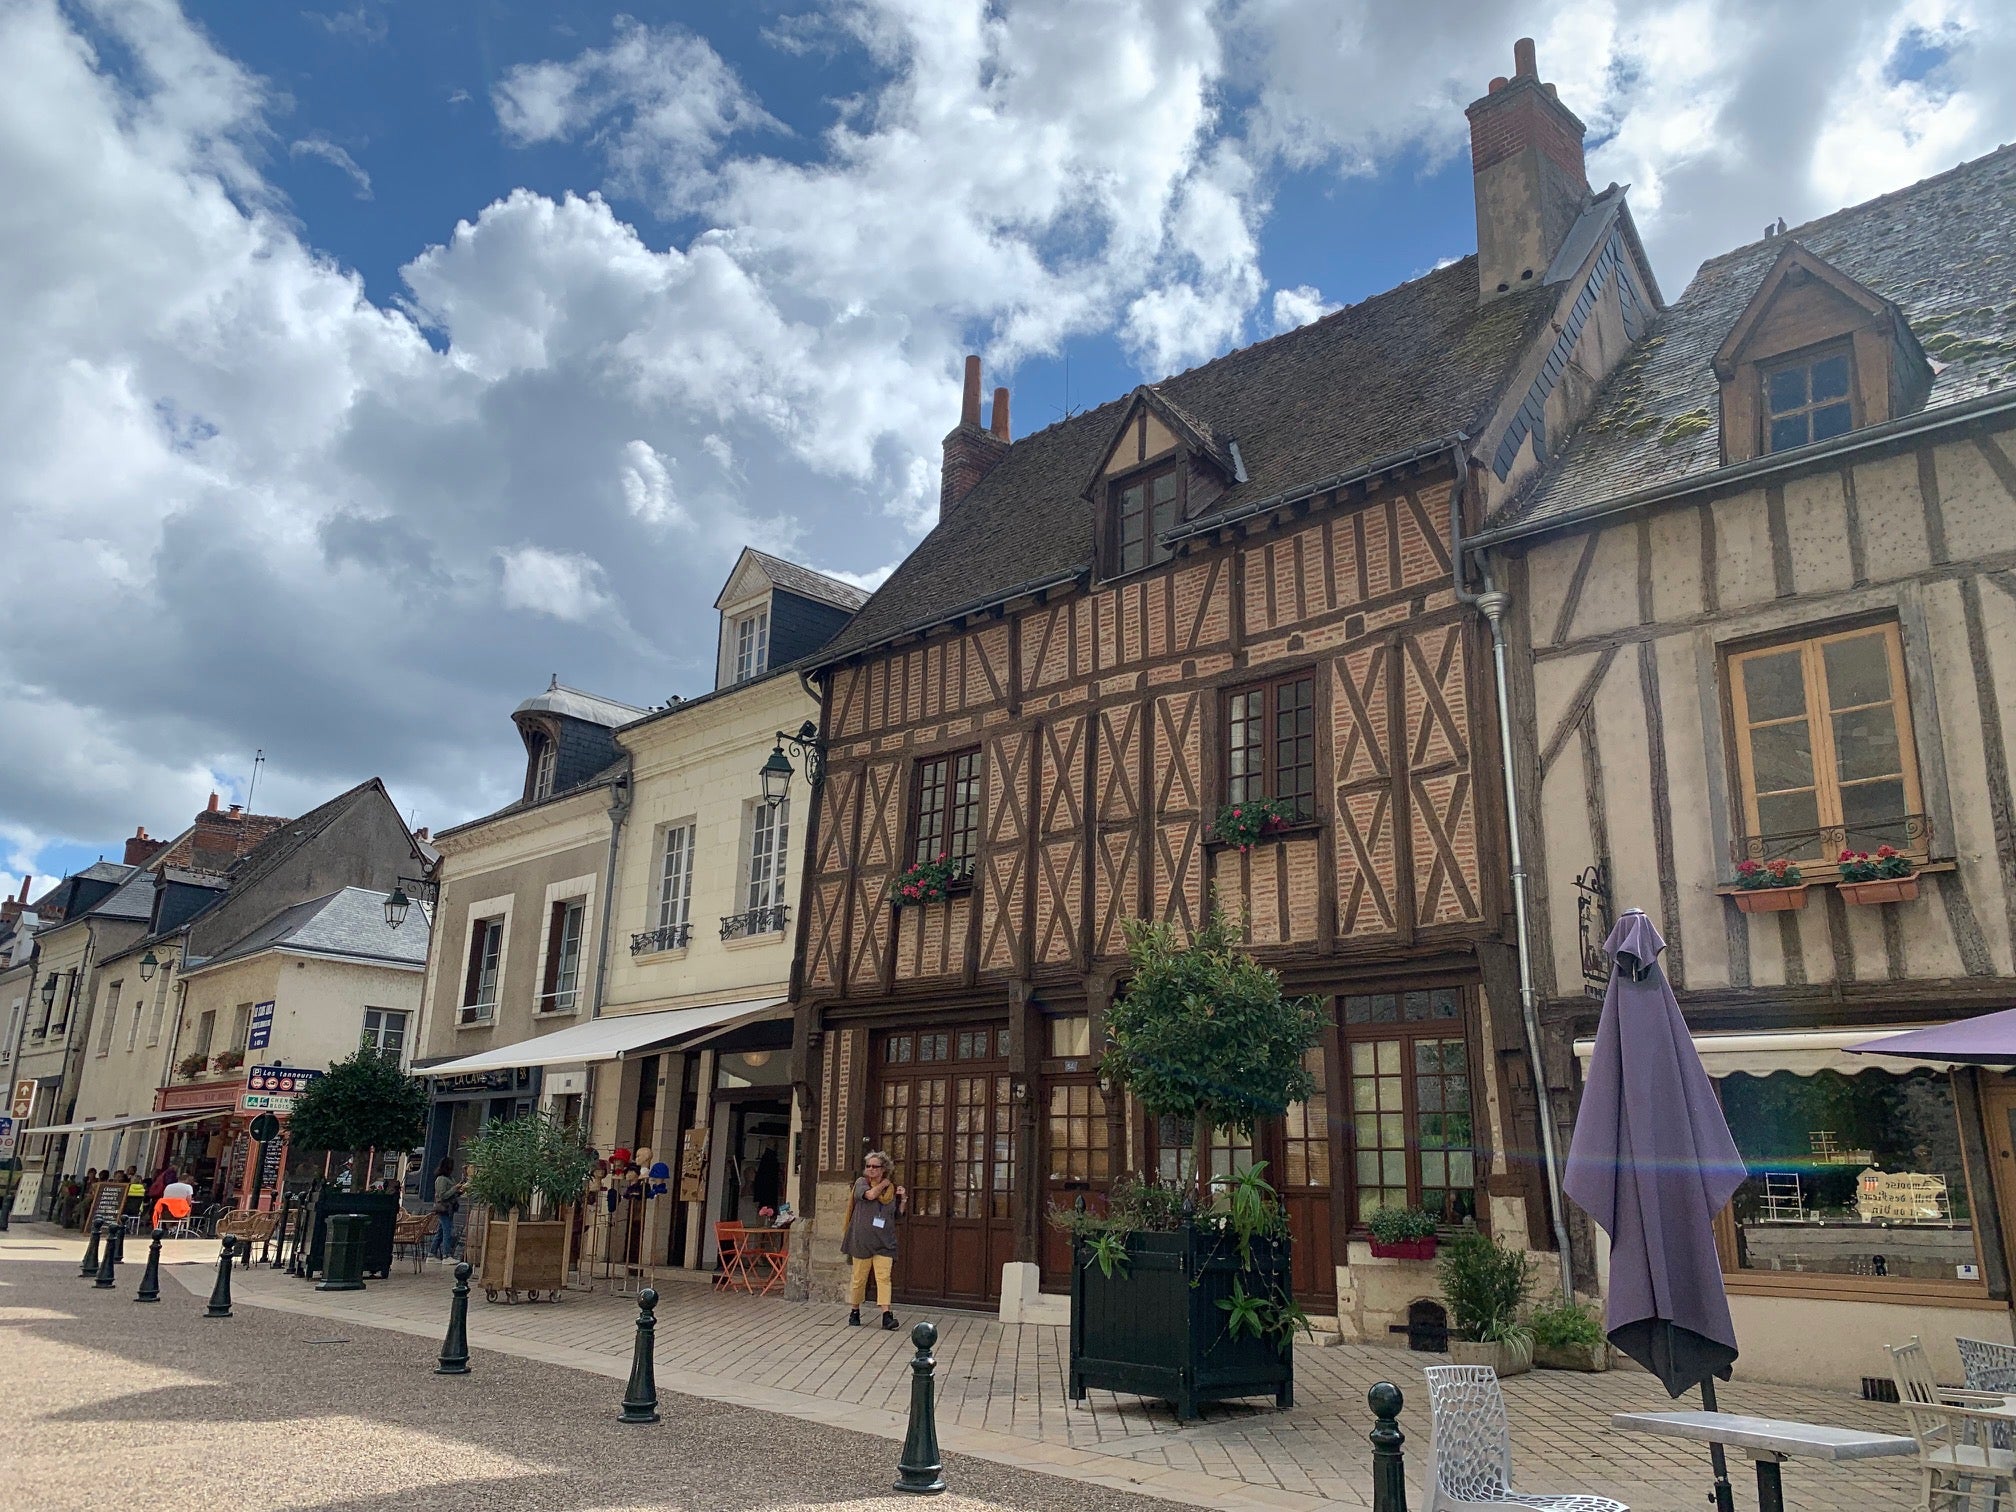 Half-timbered houses in the town of Amboise